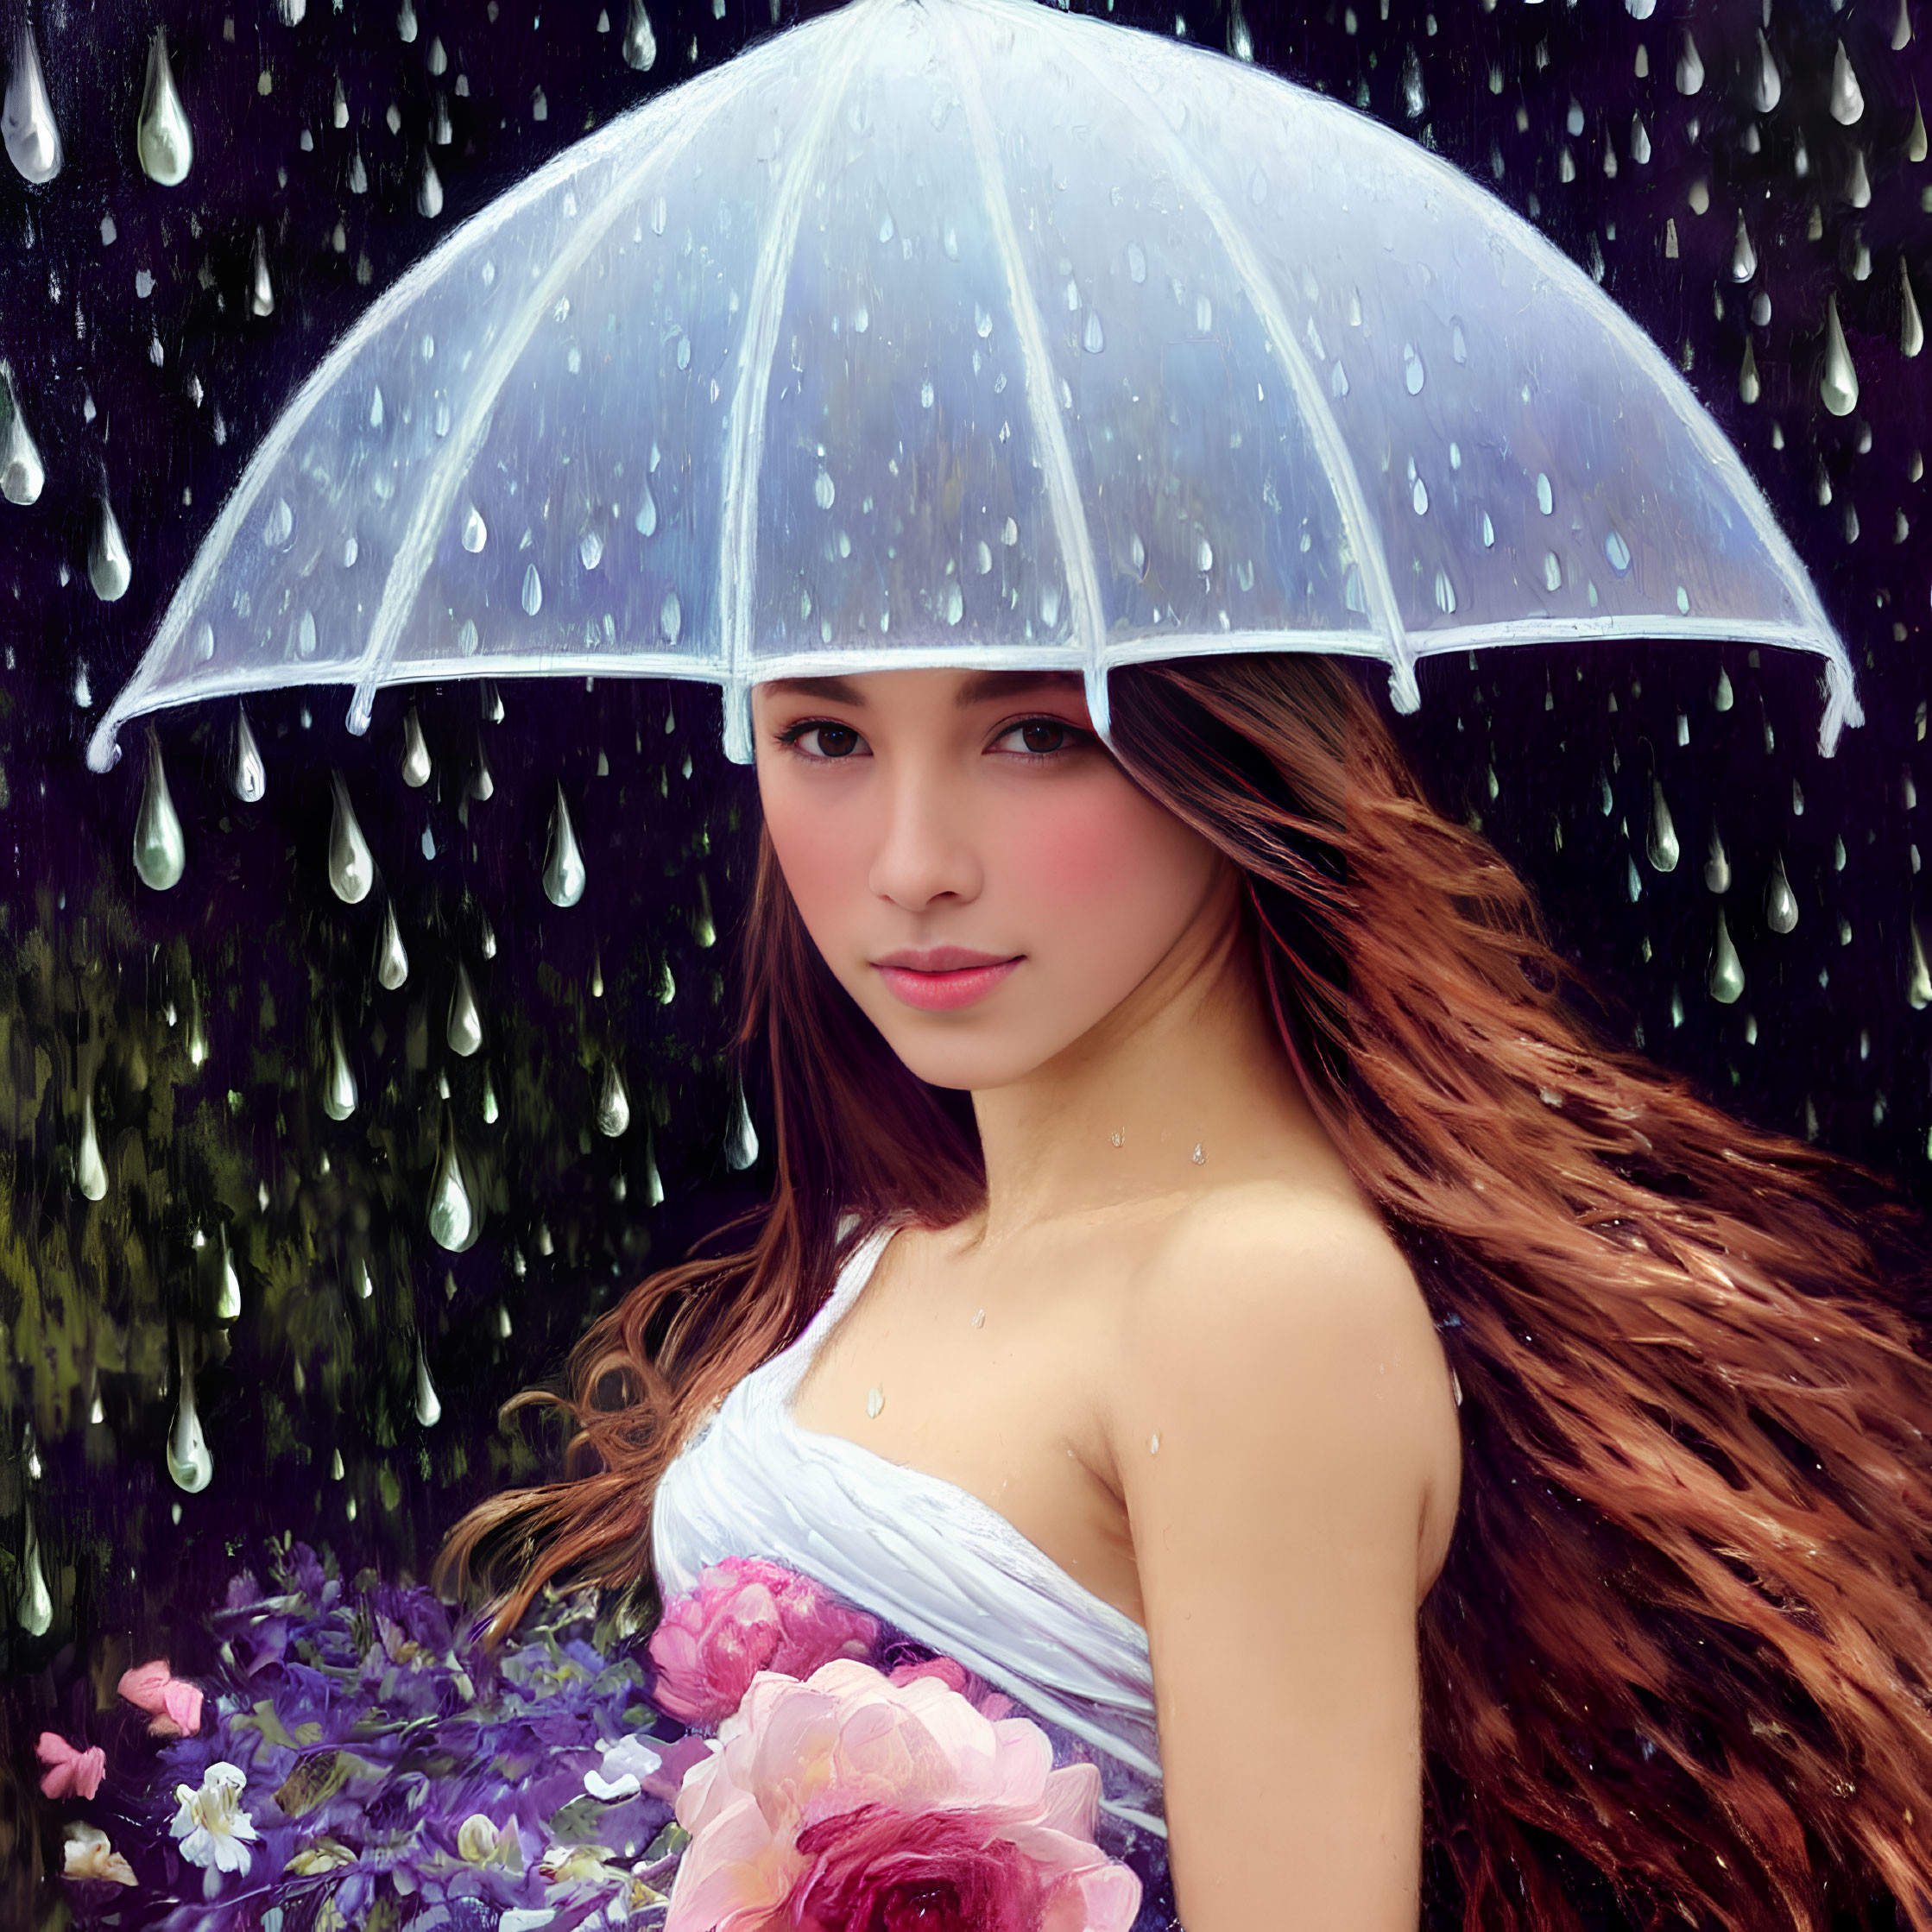 Woman with Long Hair Holding Transparent Umbrella in Falling Rain, Serene Look, Flowers Background